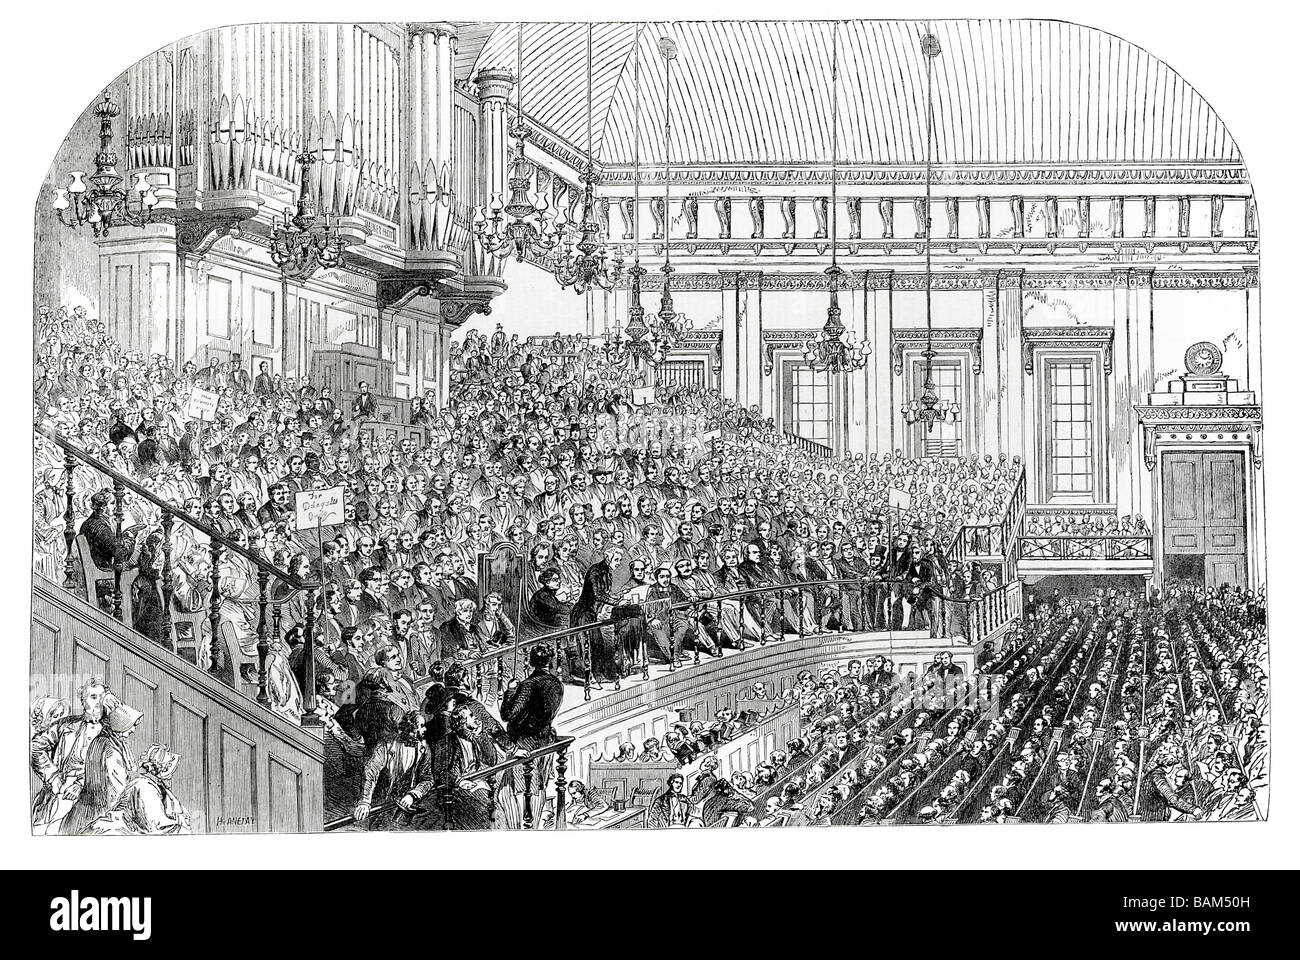 the peace congress in exeter hall sir david brewster the president reading the inauguration address 1851 Stock Photo